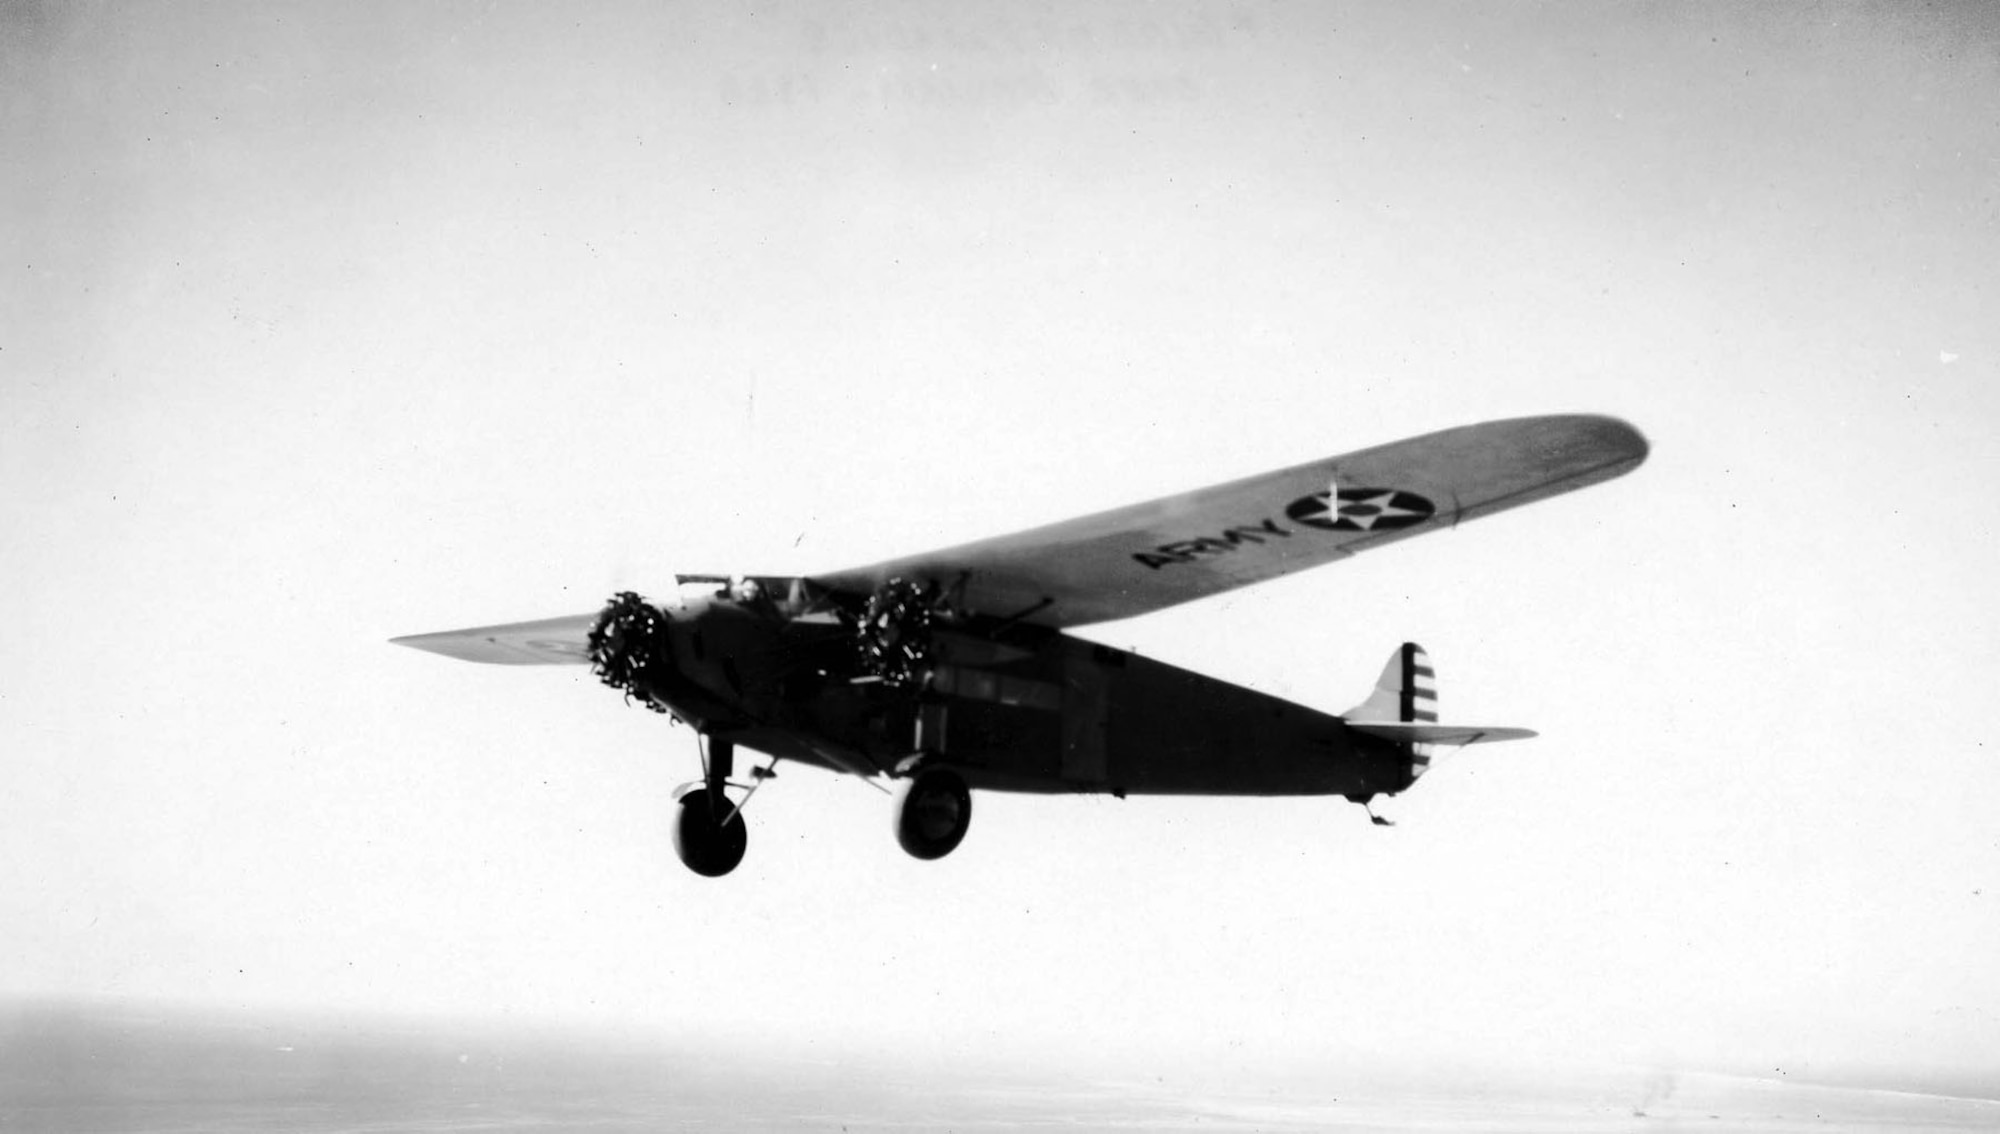 Atlantic-Fokker C-2 "Bird of Paradise" in flight on March 12, 1928, after being repainted with chrome yellow (wings and tail). (U.S. Air Force photo)